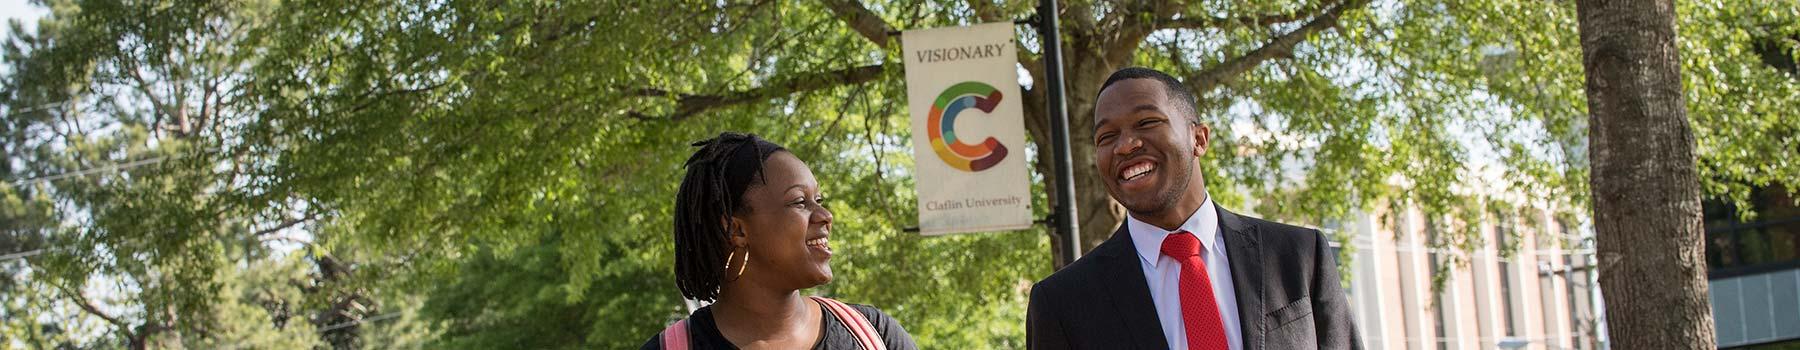 A man and a woman of color, smiling under the shade of trees in the Claflin University